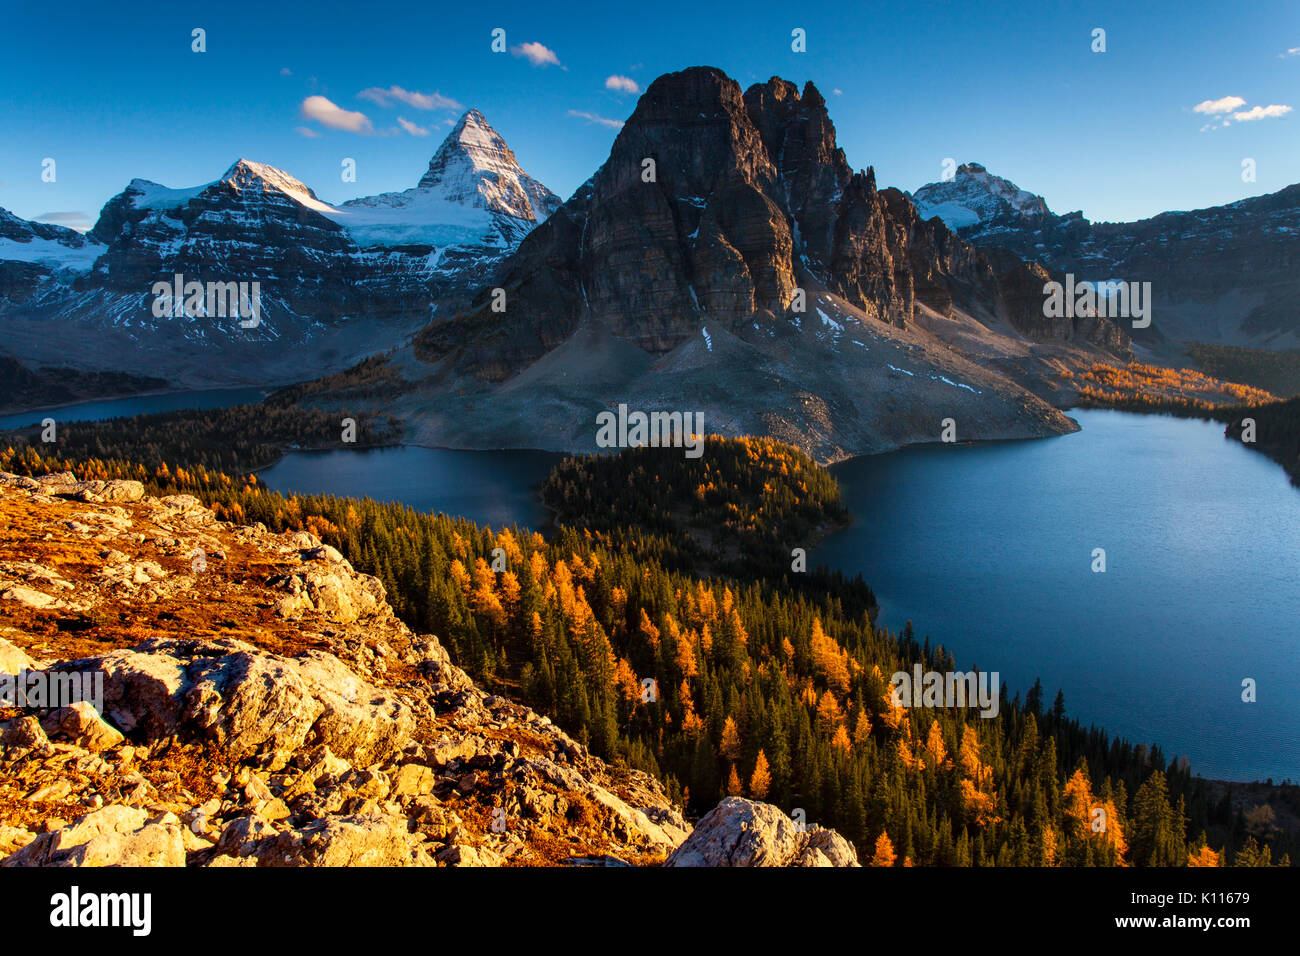 Mount Assiniboine aboe Lake Mago and Lake Cerrulean amidst fall larches, Mount Assiniboine Provincial Park, Rocky Mountains, British Columbia, Canada. Stock Photo